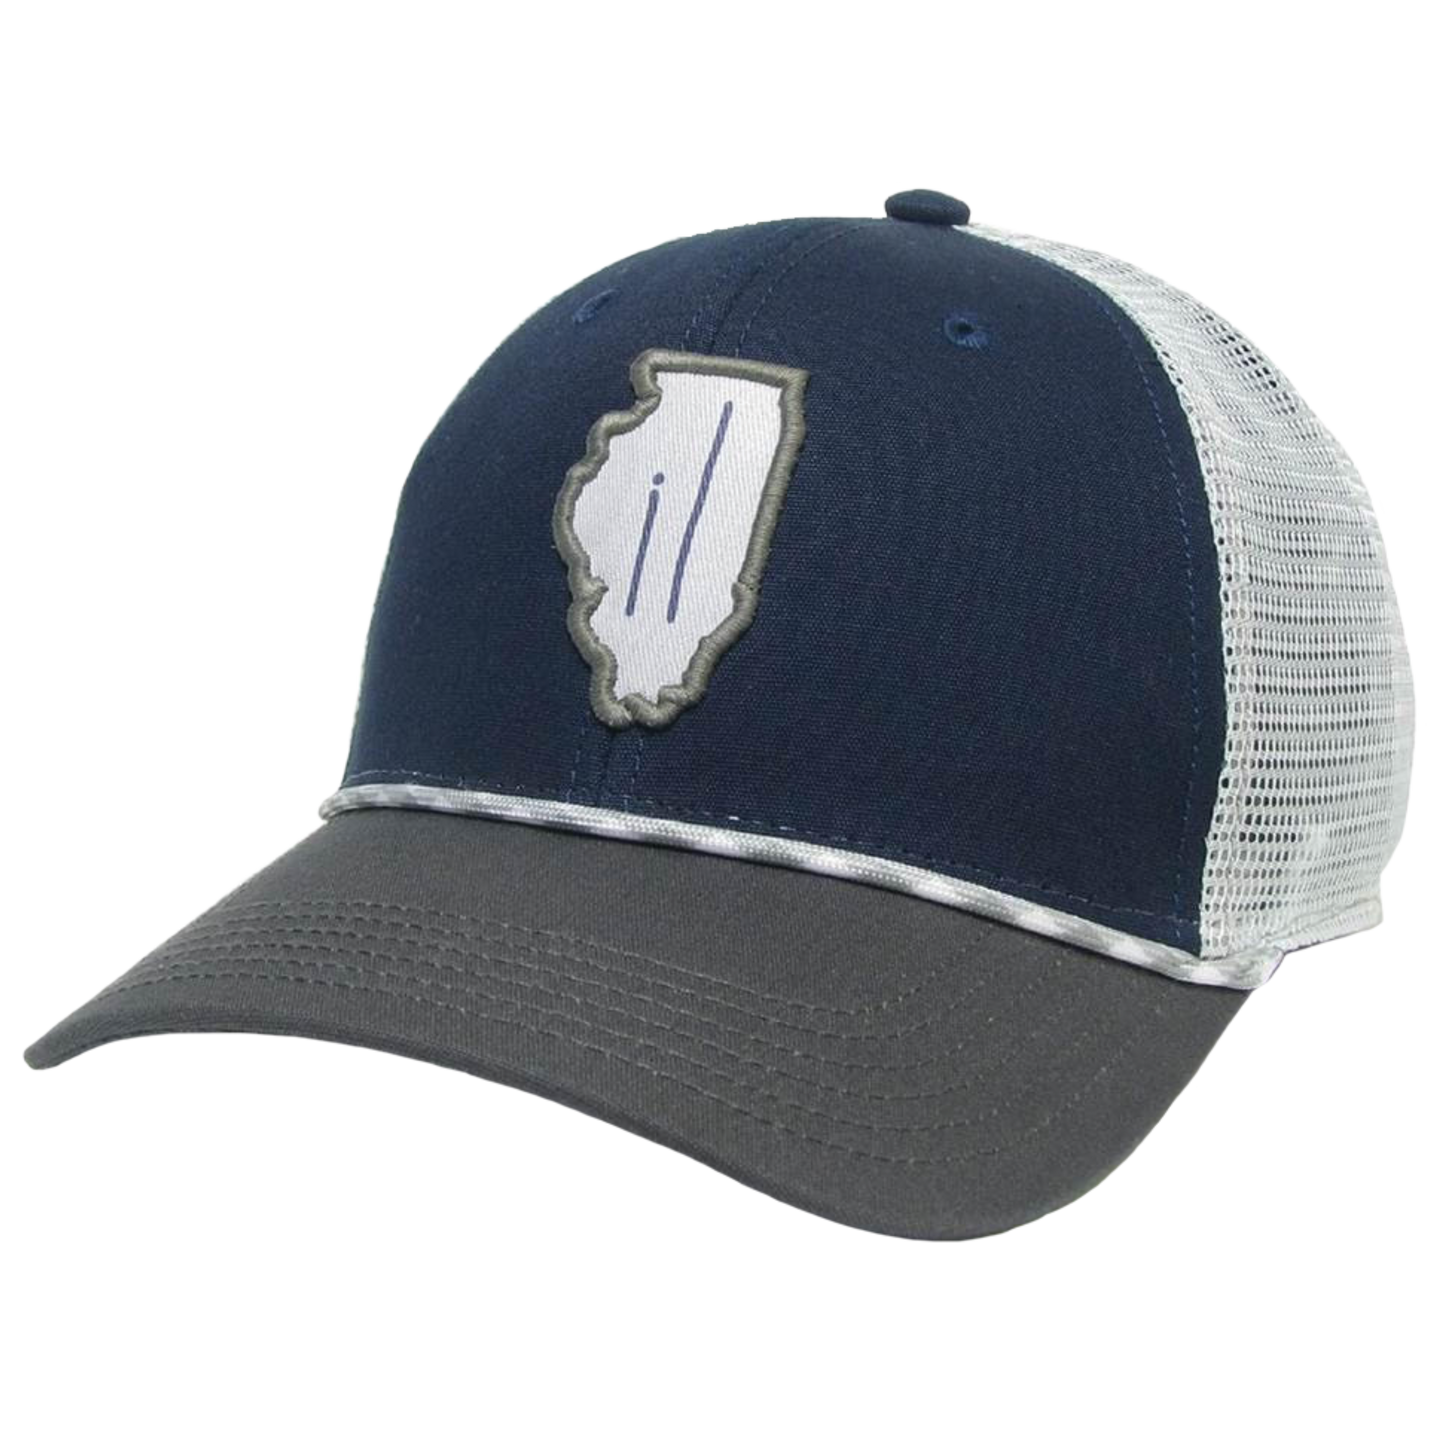 Illinois Mid-Pro Trucker Hat in Navy/Dark Grey/Silver with Rope